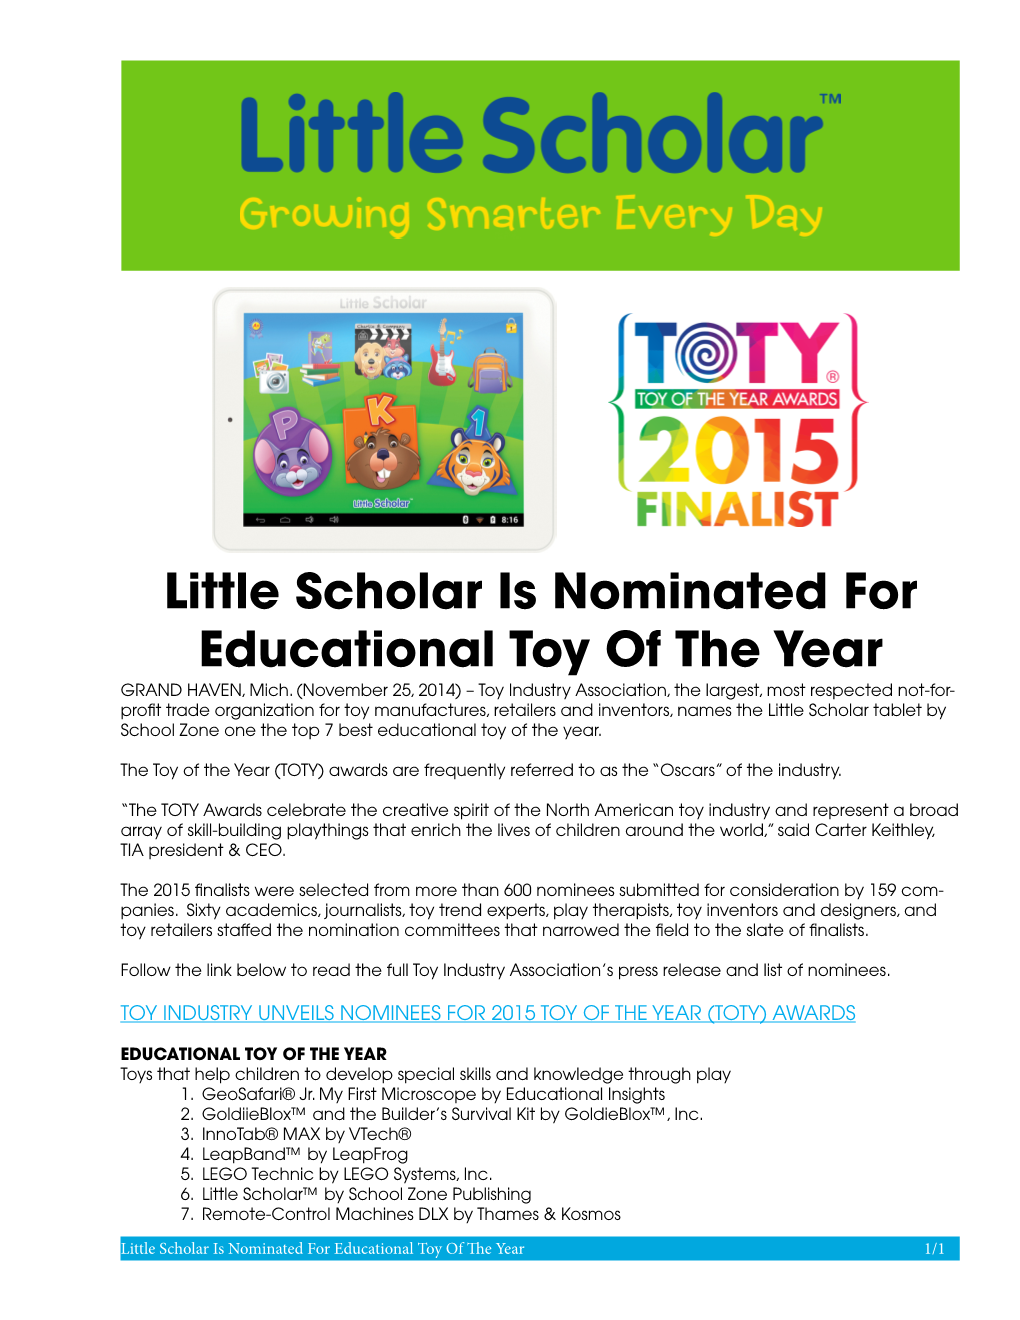 Little Scholar Is Nominated for Educational Toy of the Year GRAND HAVEN, Mich